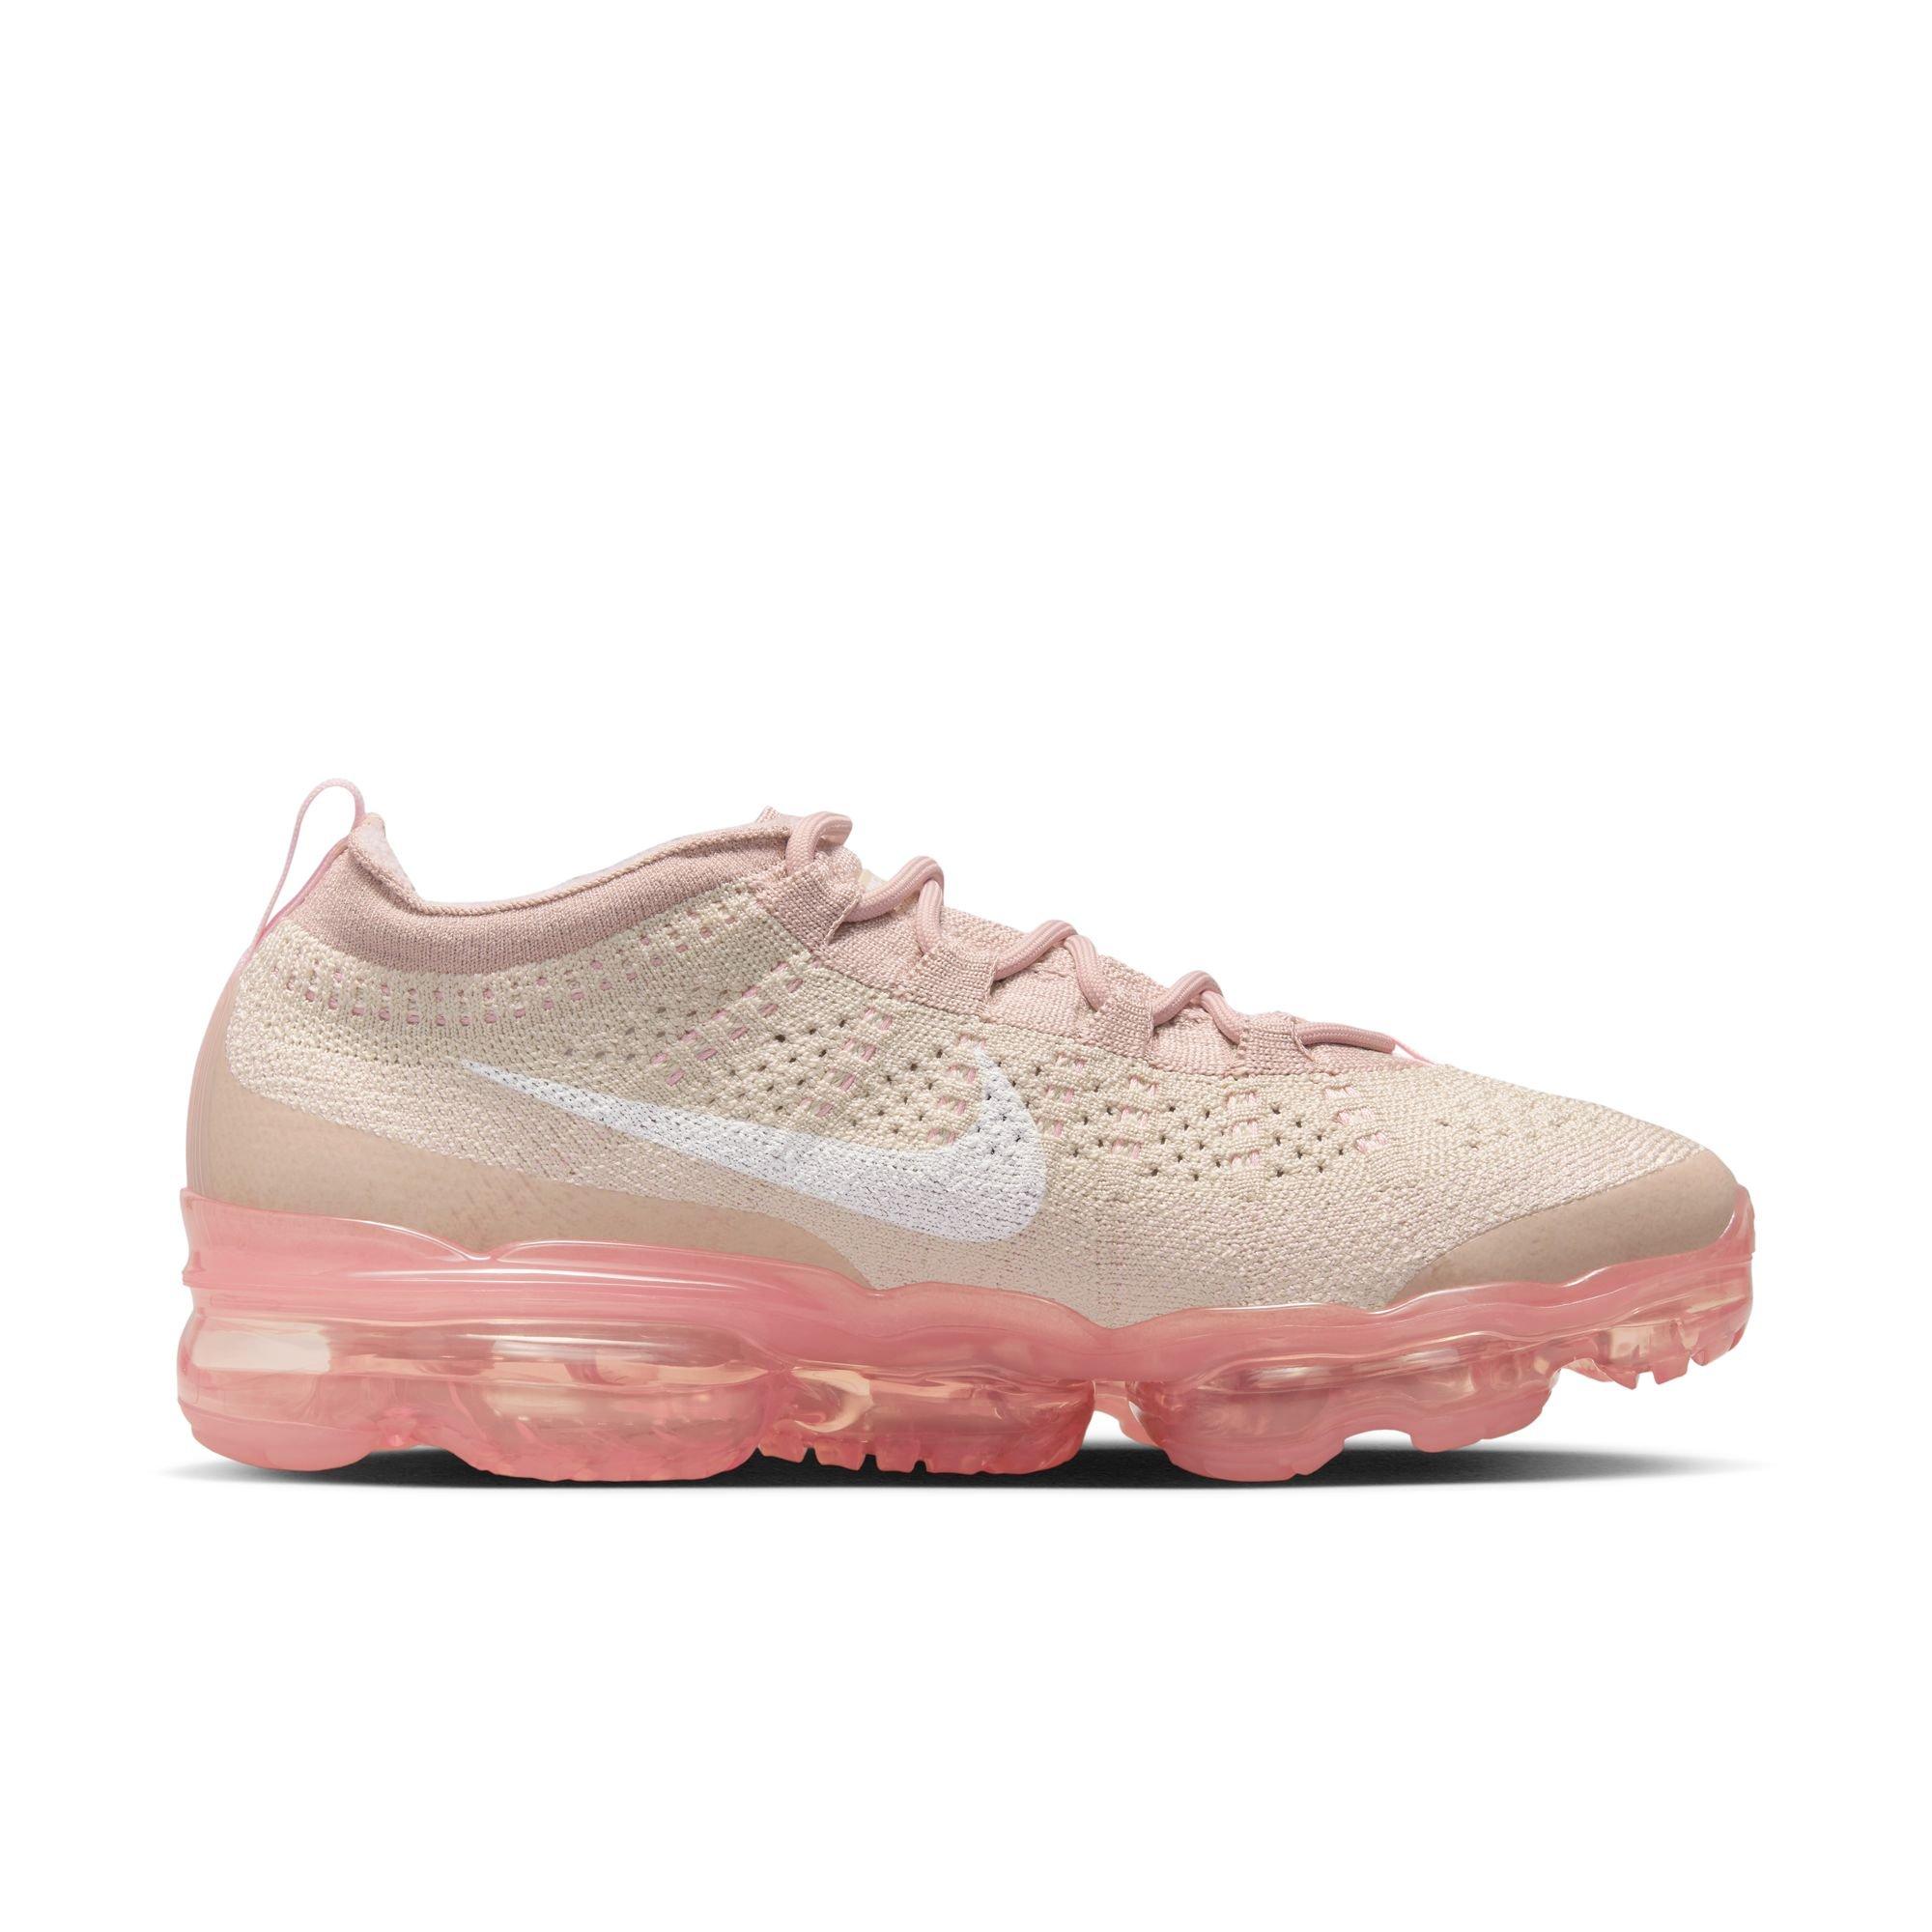 How To Look Pretty With Nike Air Vapormax 2019 & Review 